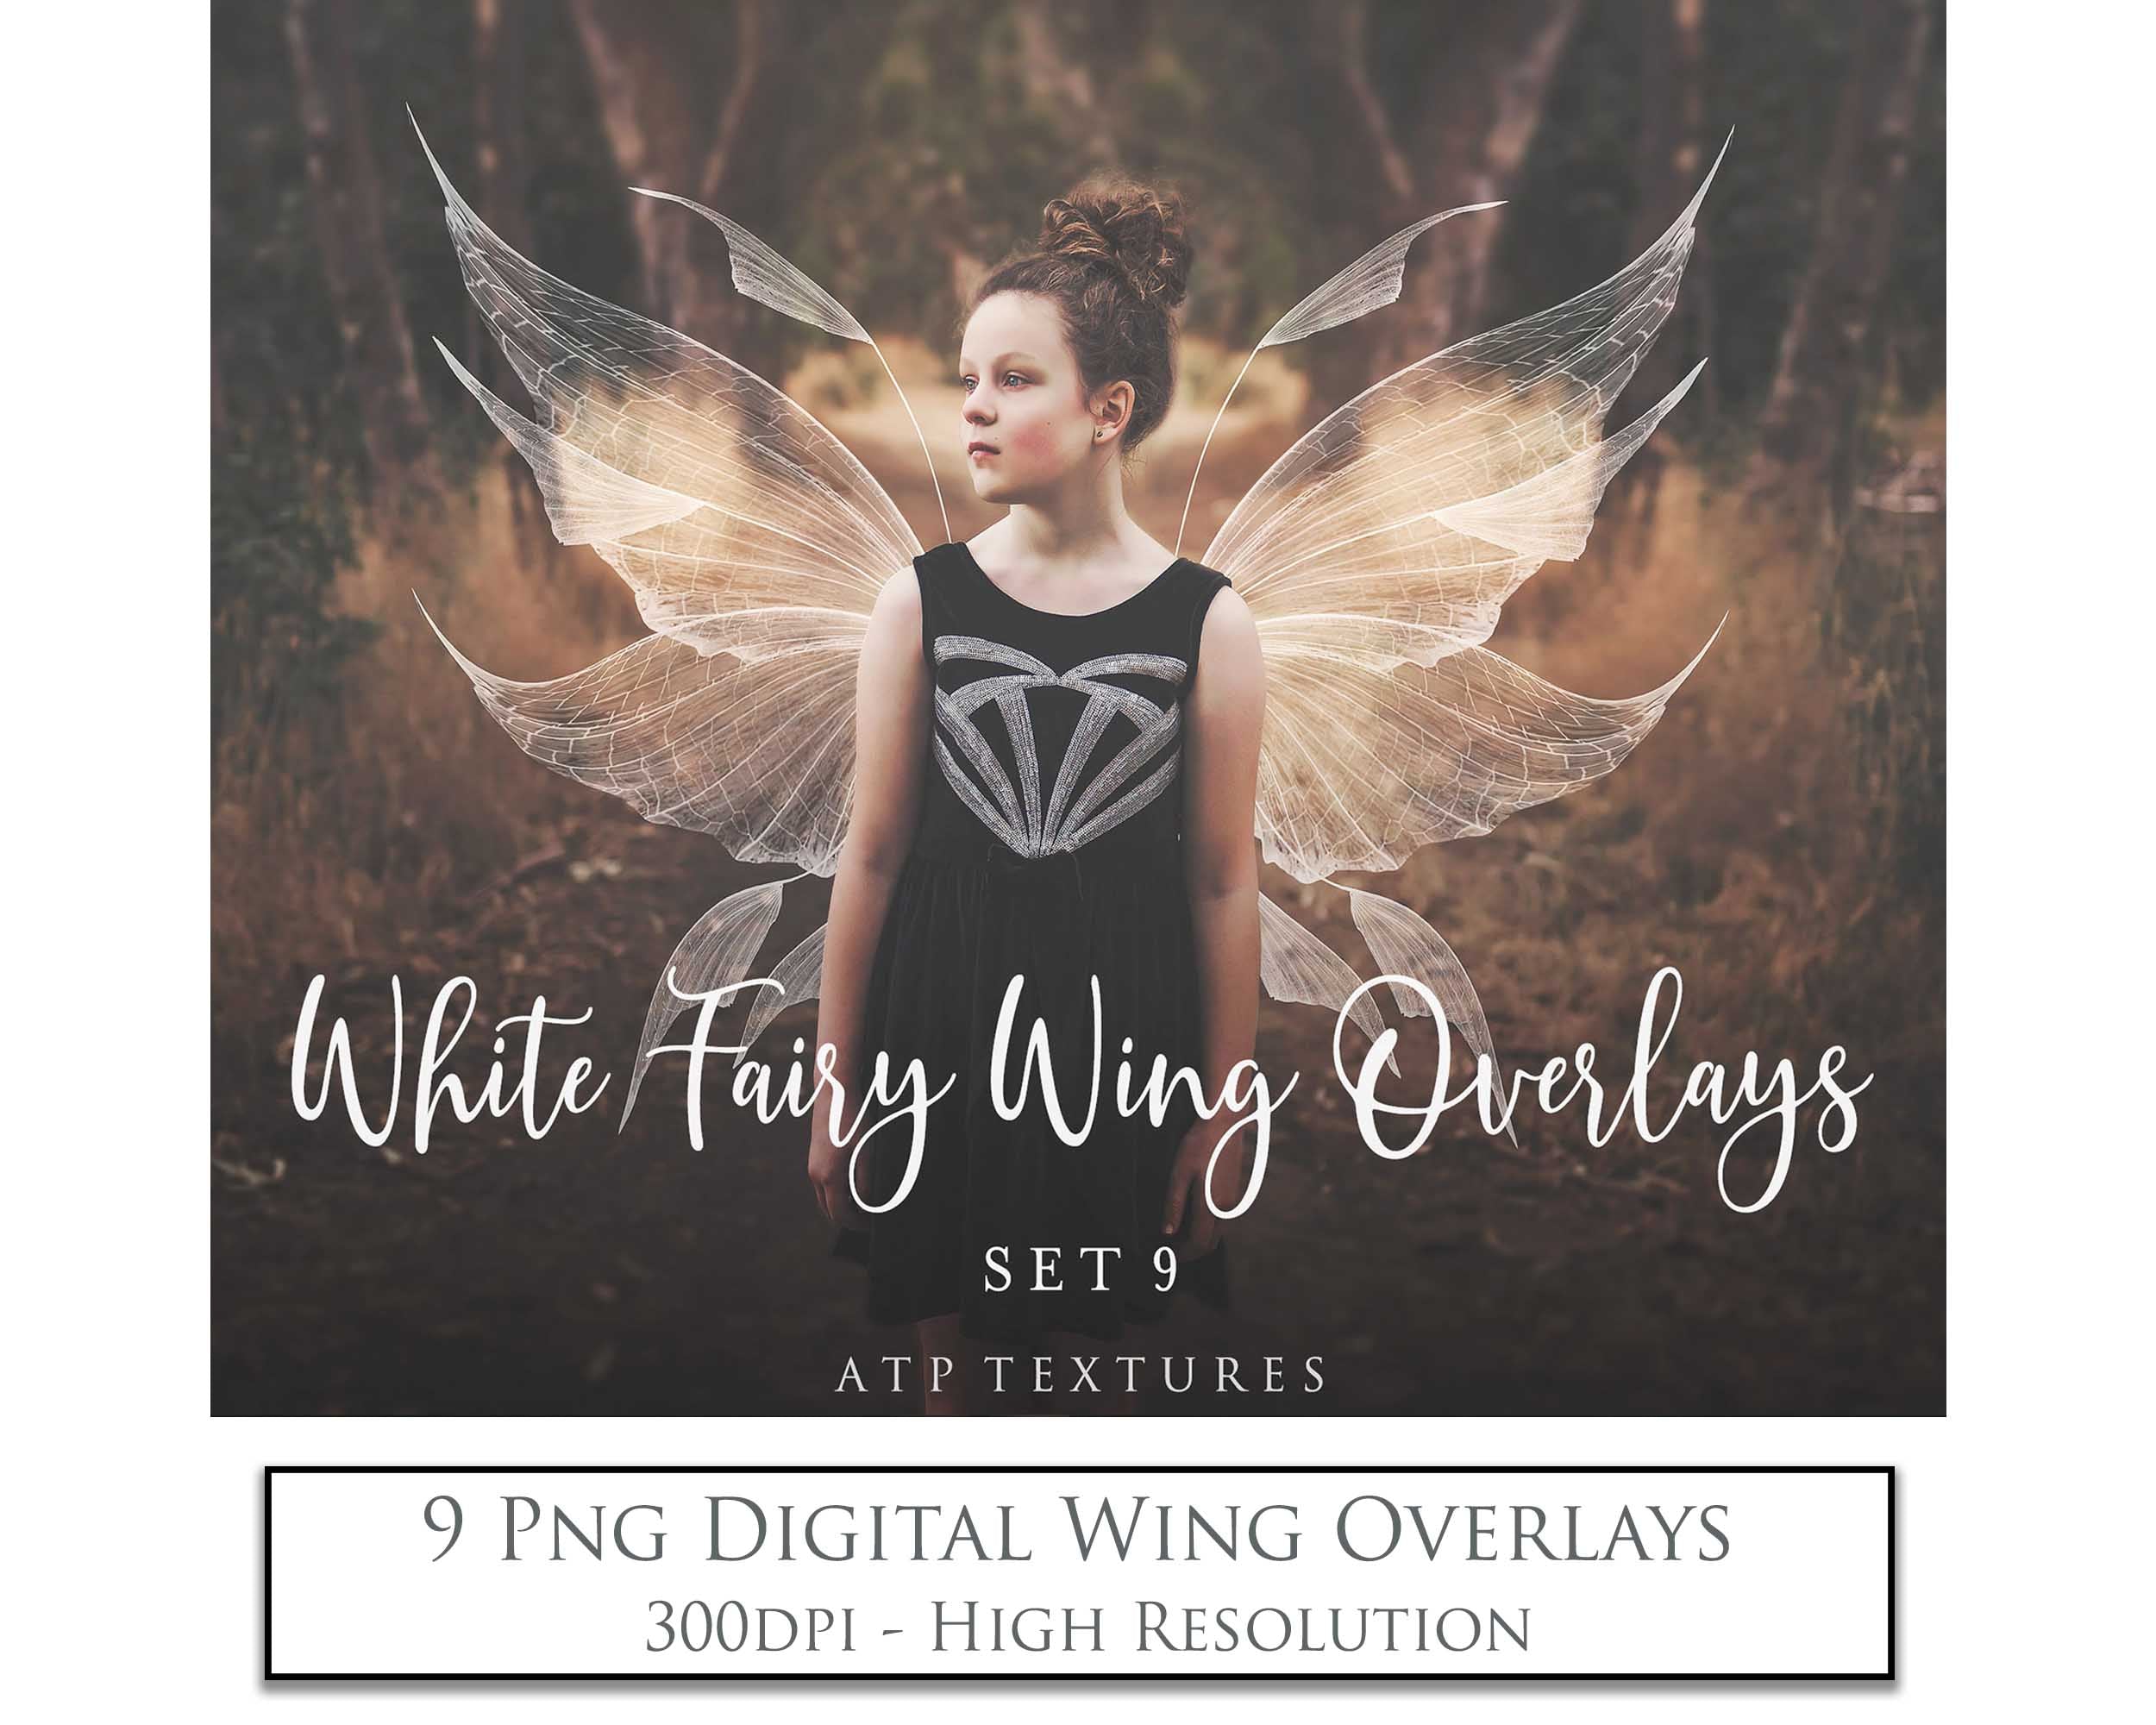 Fairy Wing Overlays For Photographers, Photoshop, Digital art. Transparent, high resolution, faery wings for photography. PNG overlays for fantasy digital art and Child portraiture. White fairy wings. Photo Overlays. Digital download. Graphic effects. Assets for photographers. ATP Textures